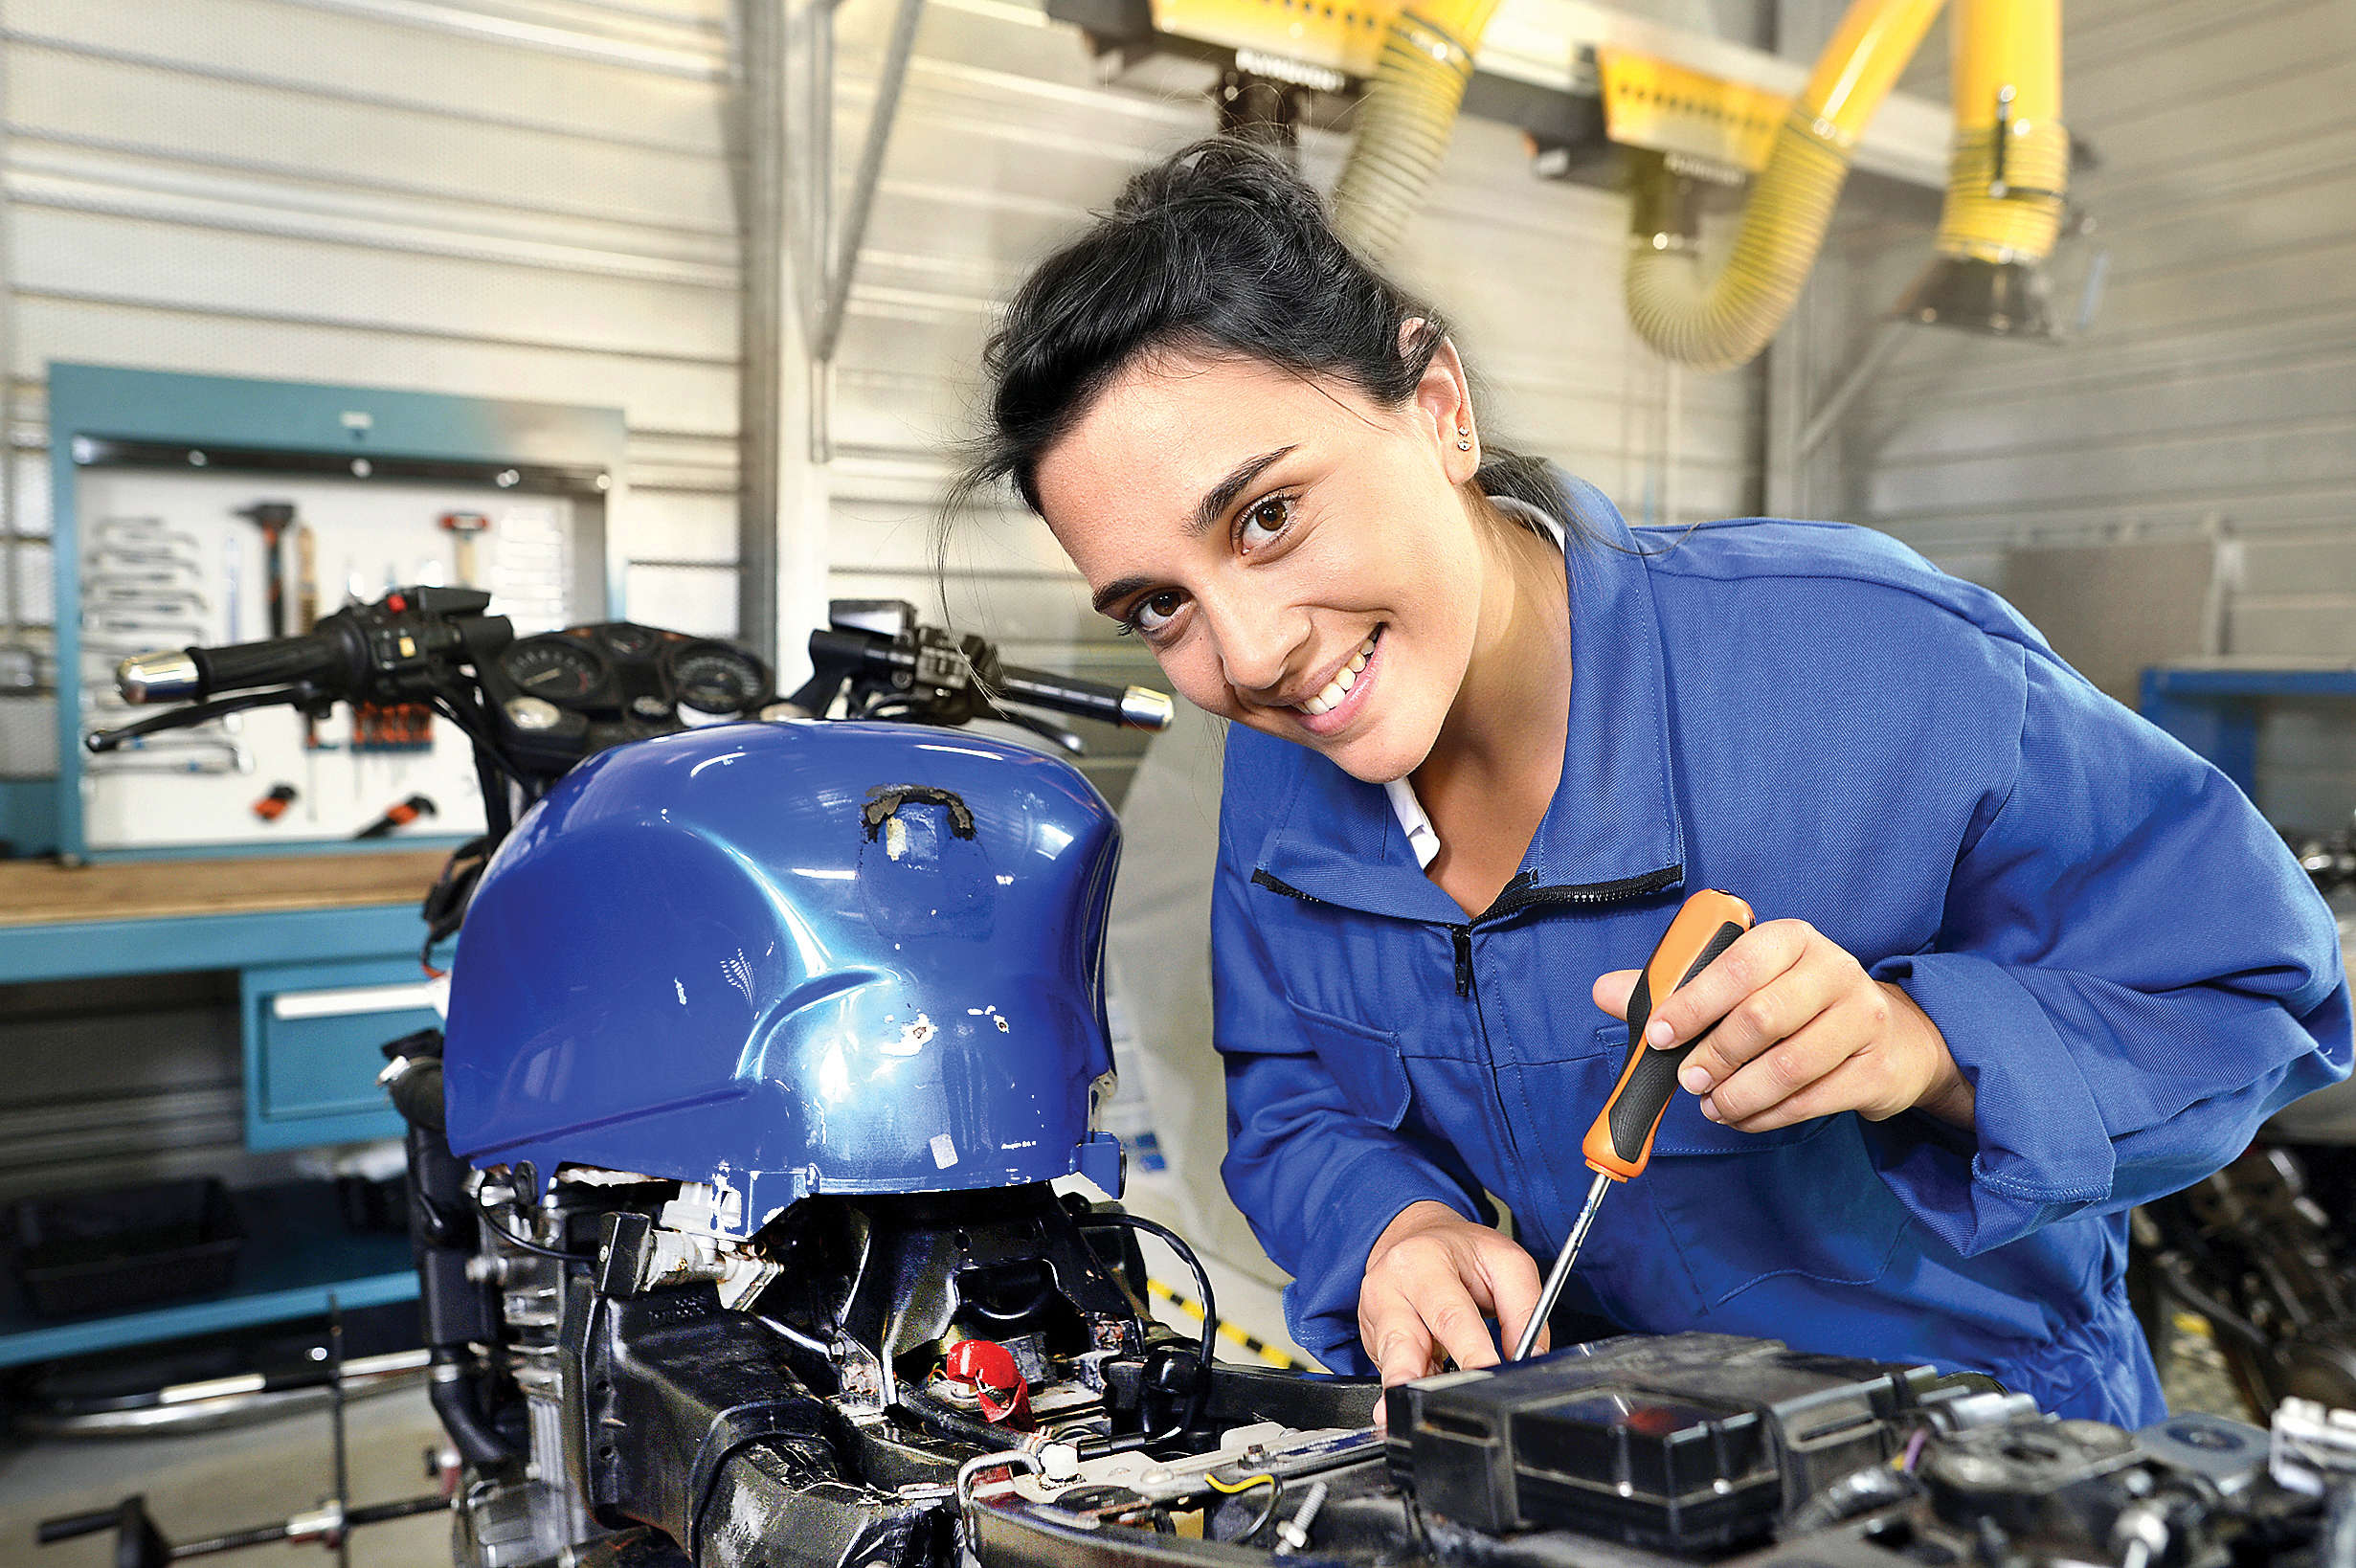 Ever thought why there are fewer girls in Mechanical Engineering? Here's why